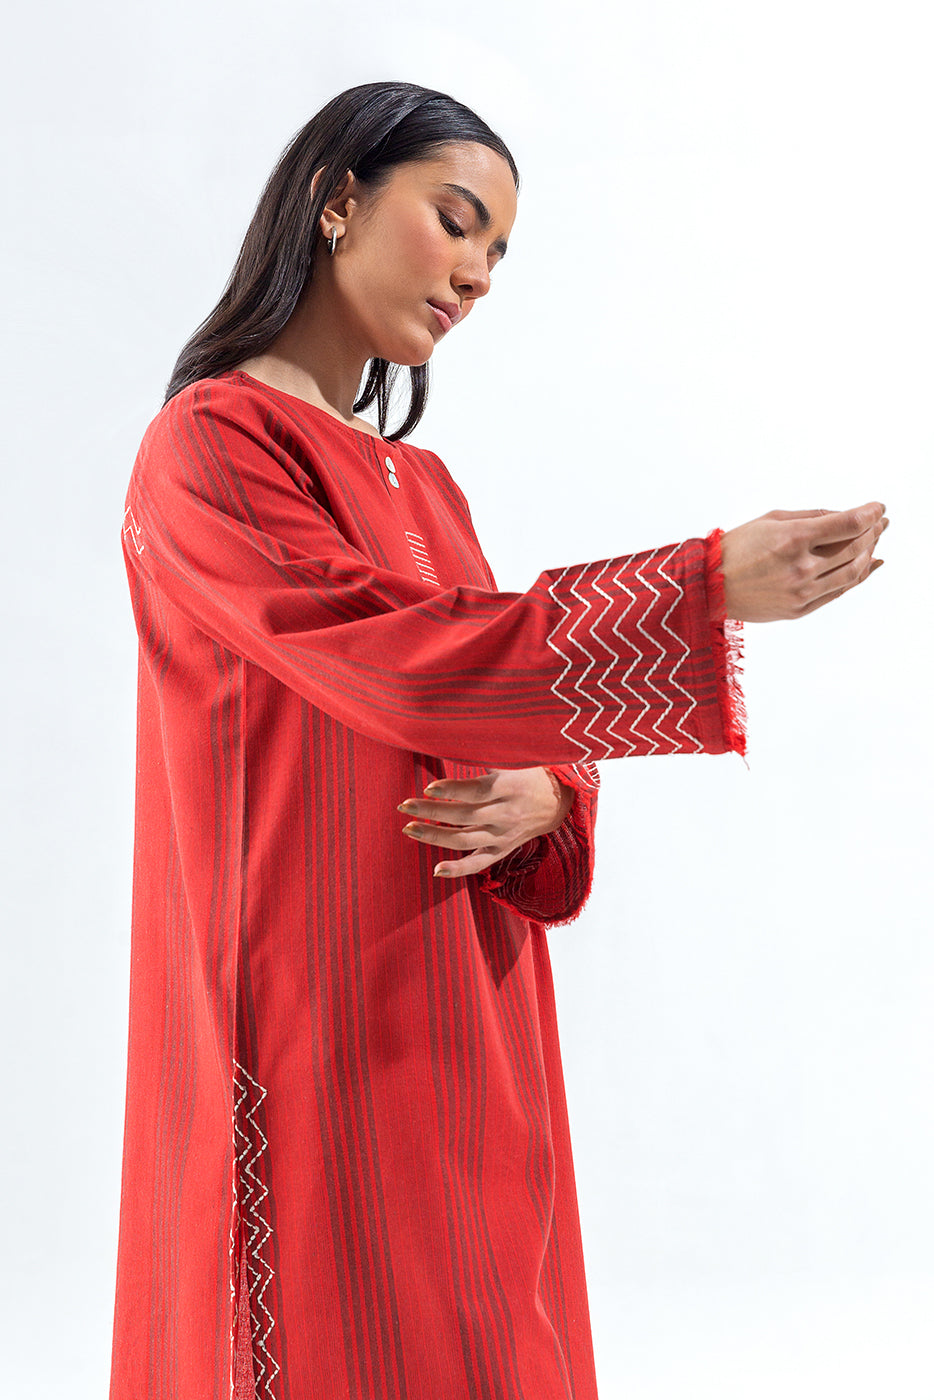 EMBROIDERED YARN DYED SHIRT (PRET) - BEECHTREE